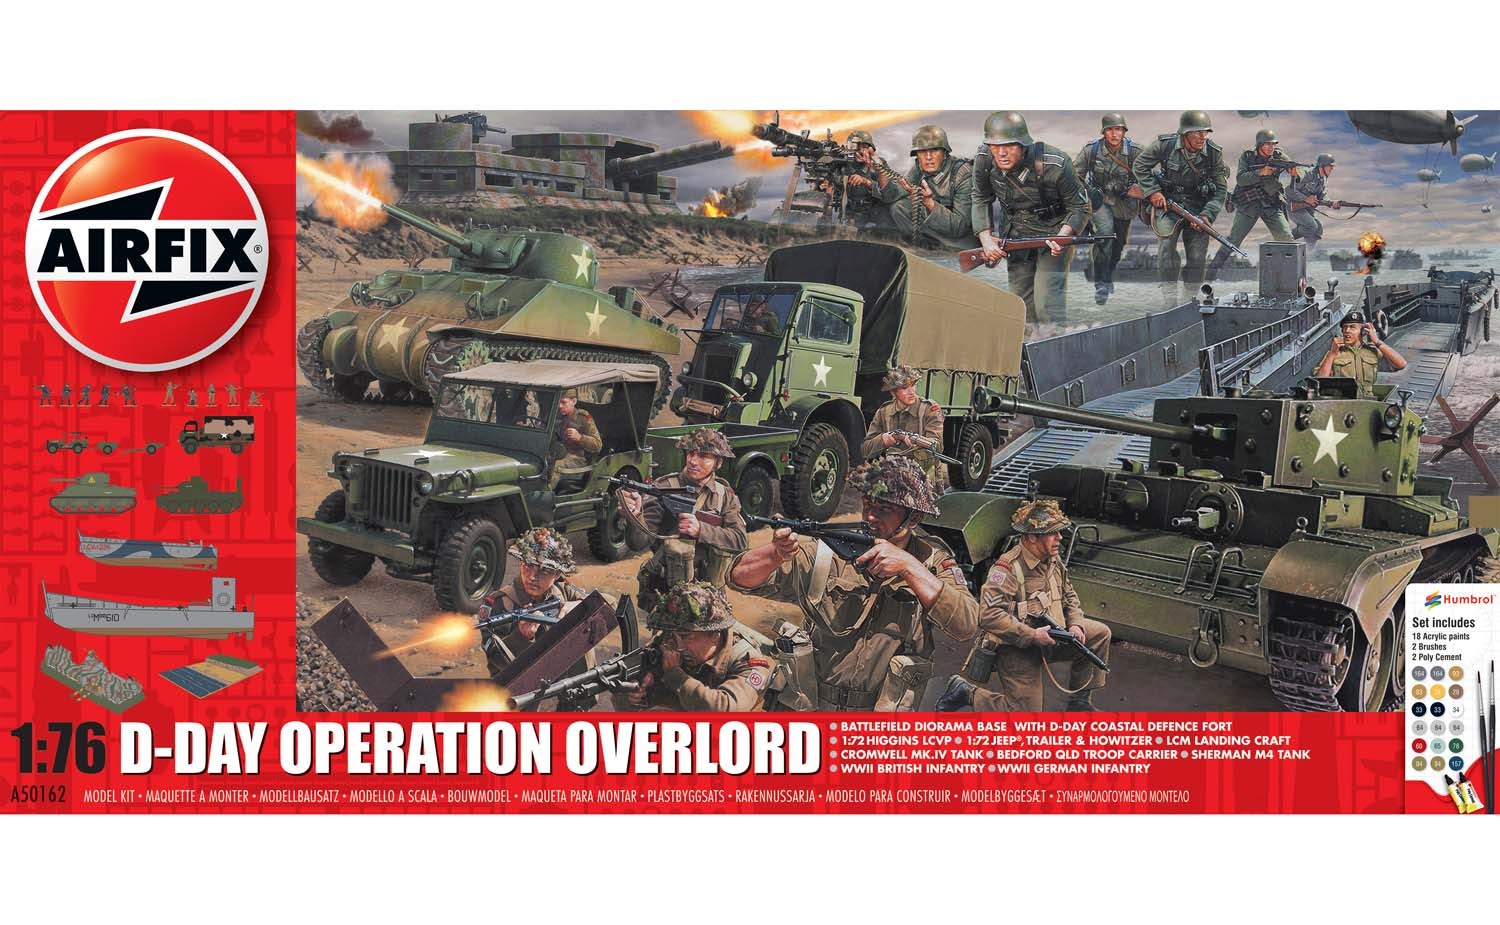 D-Day 75th Anniversary Operation Overlord Set